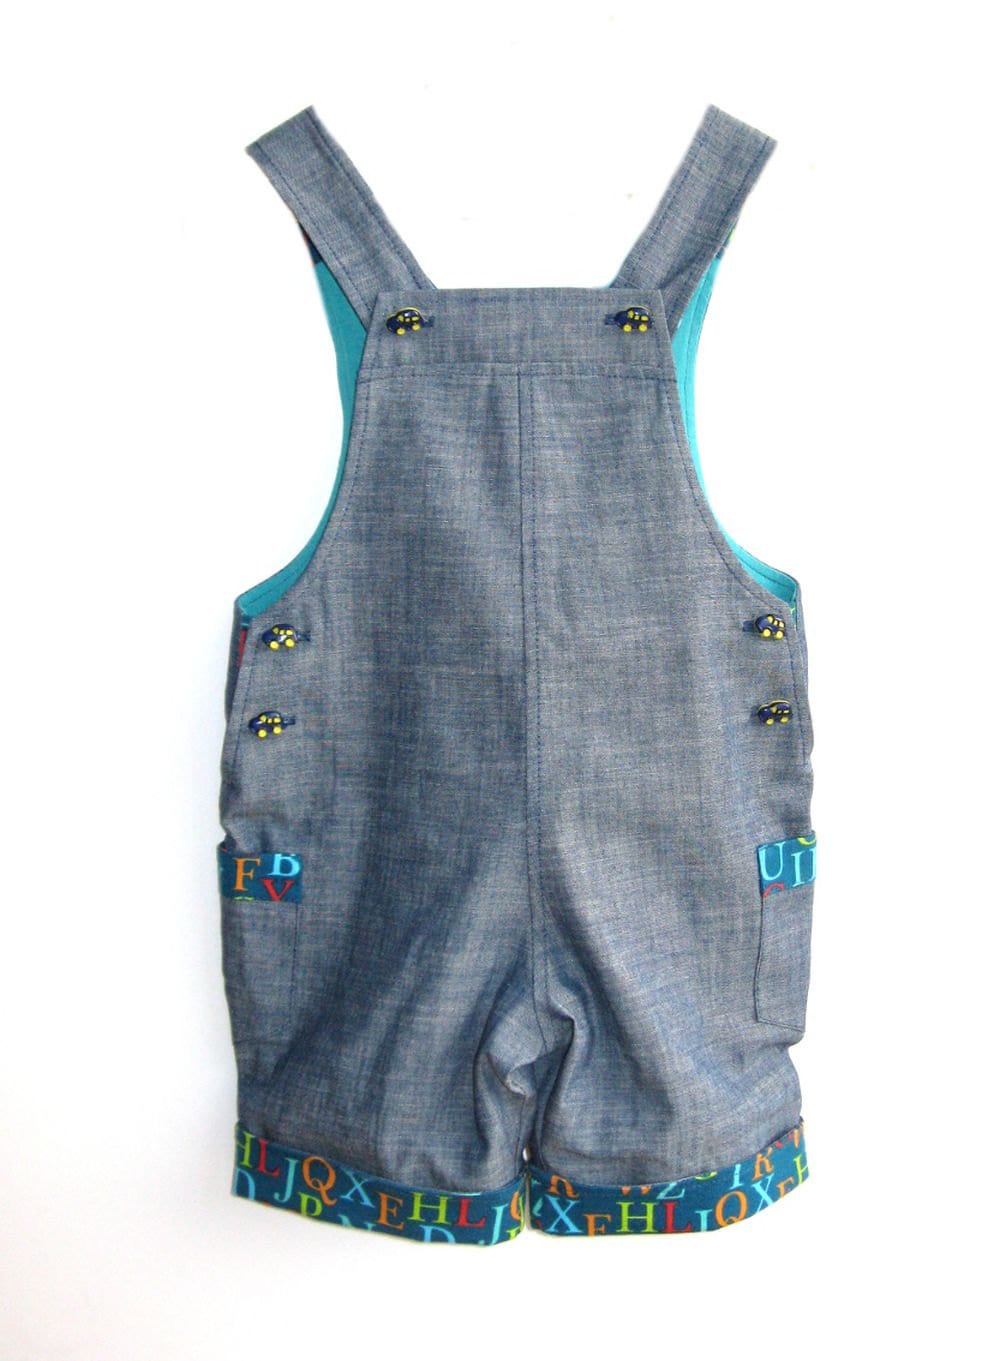 Boys short overall kindergarten jeans overall shorts by EcoEmi